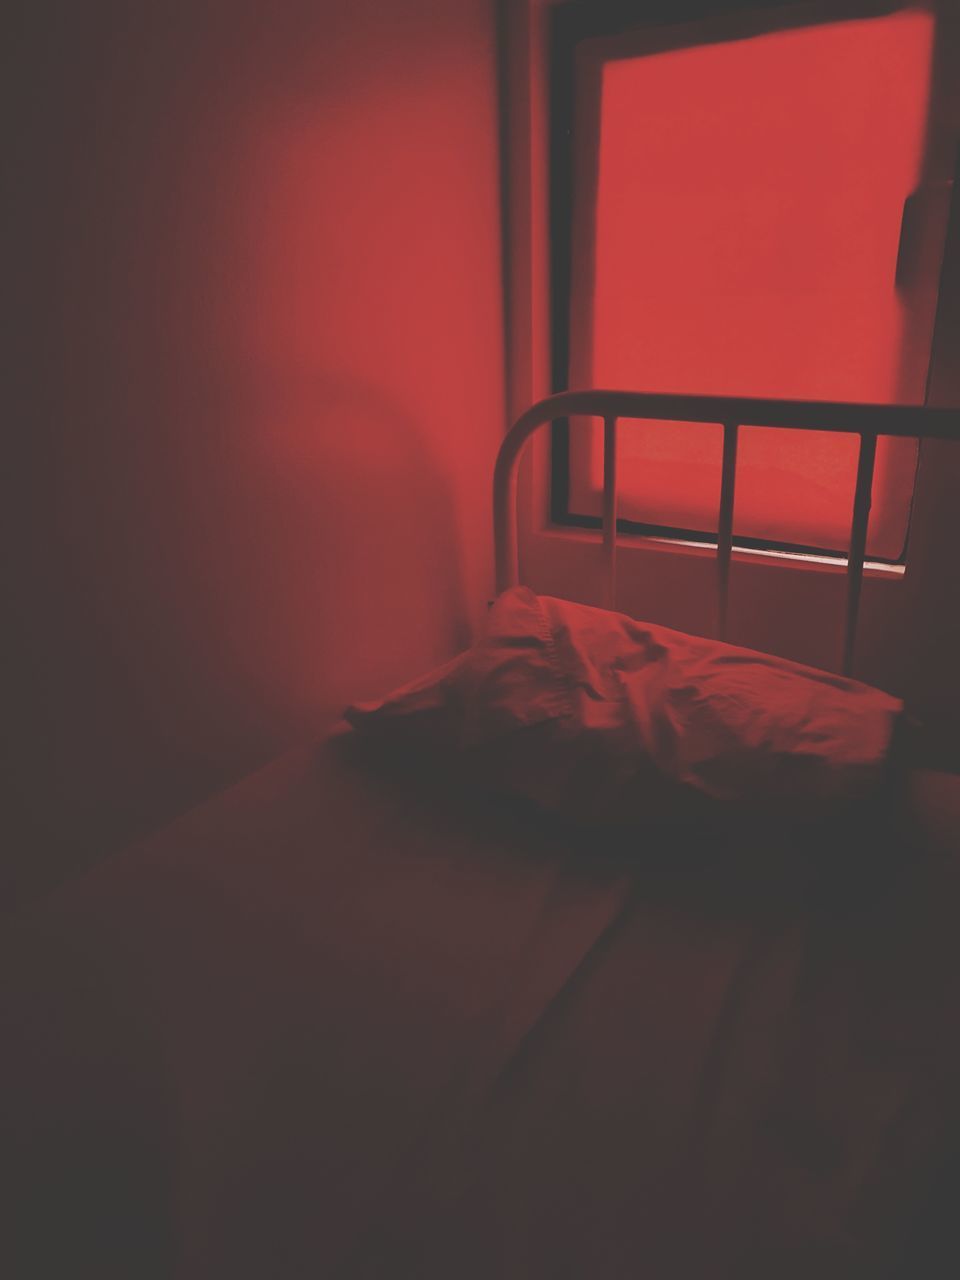 EMPTY RED TABLE IN ROOM